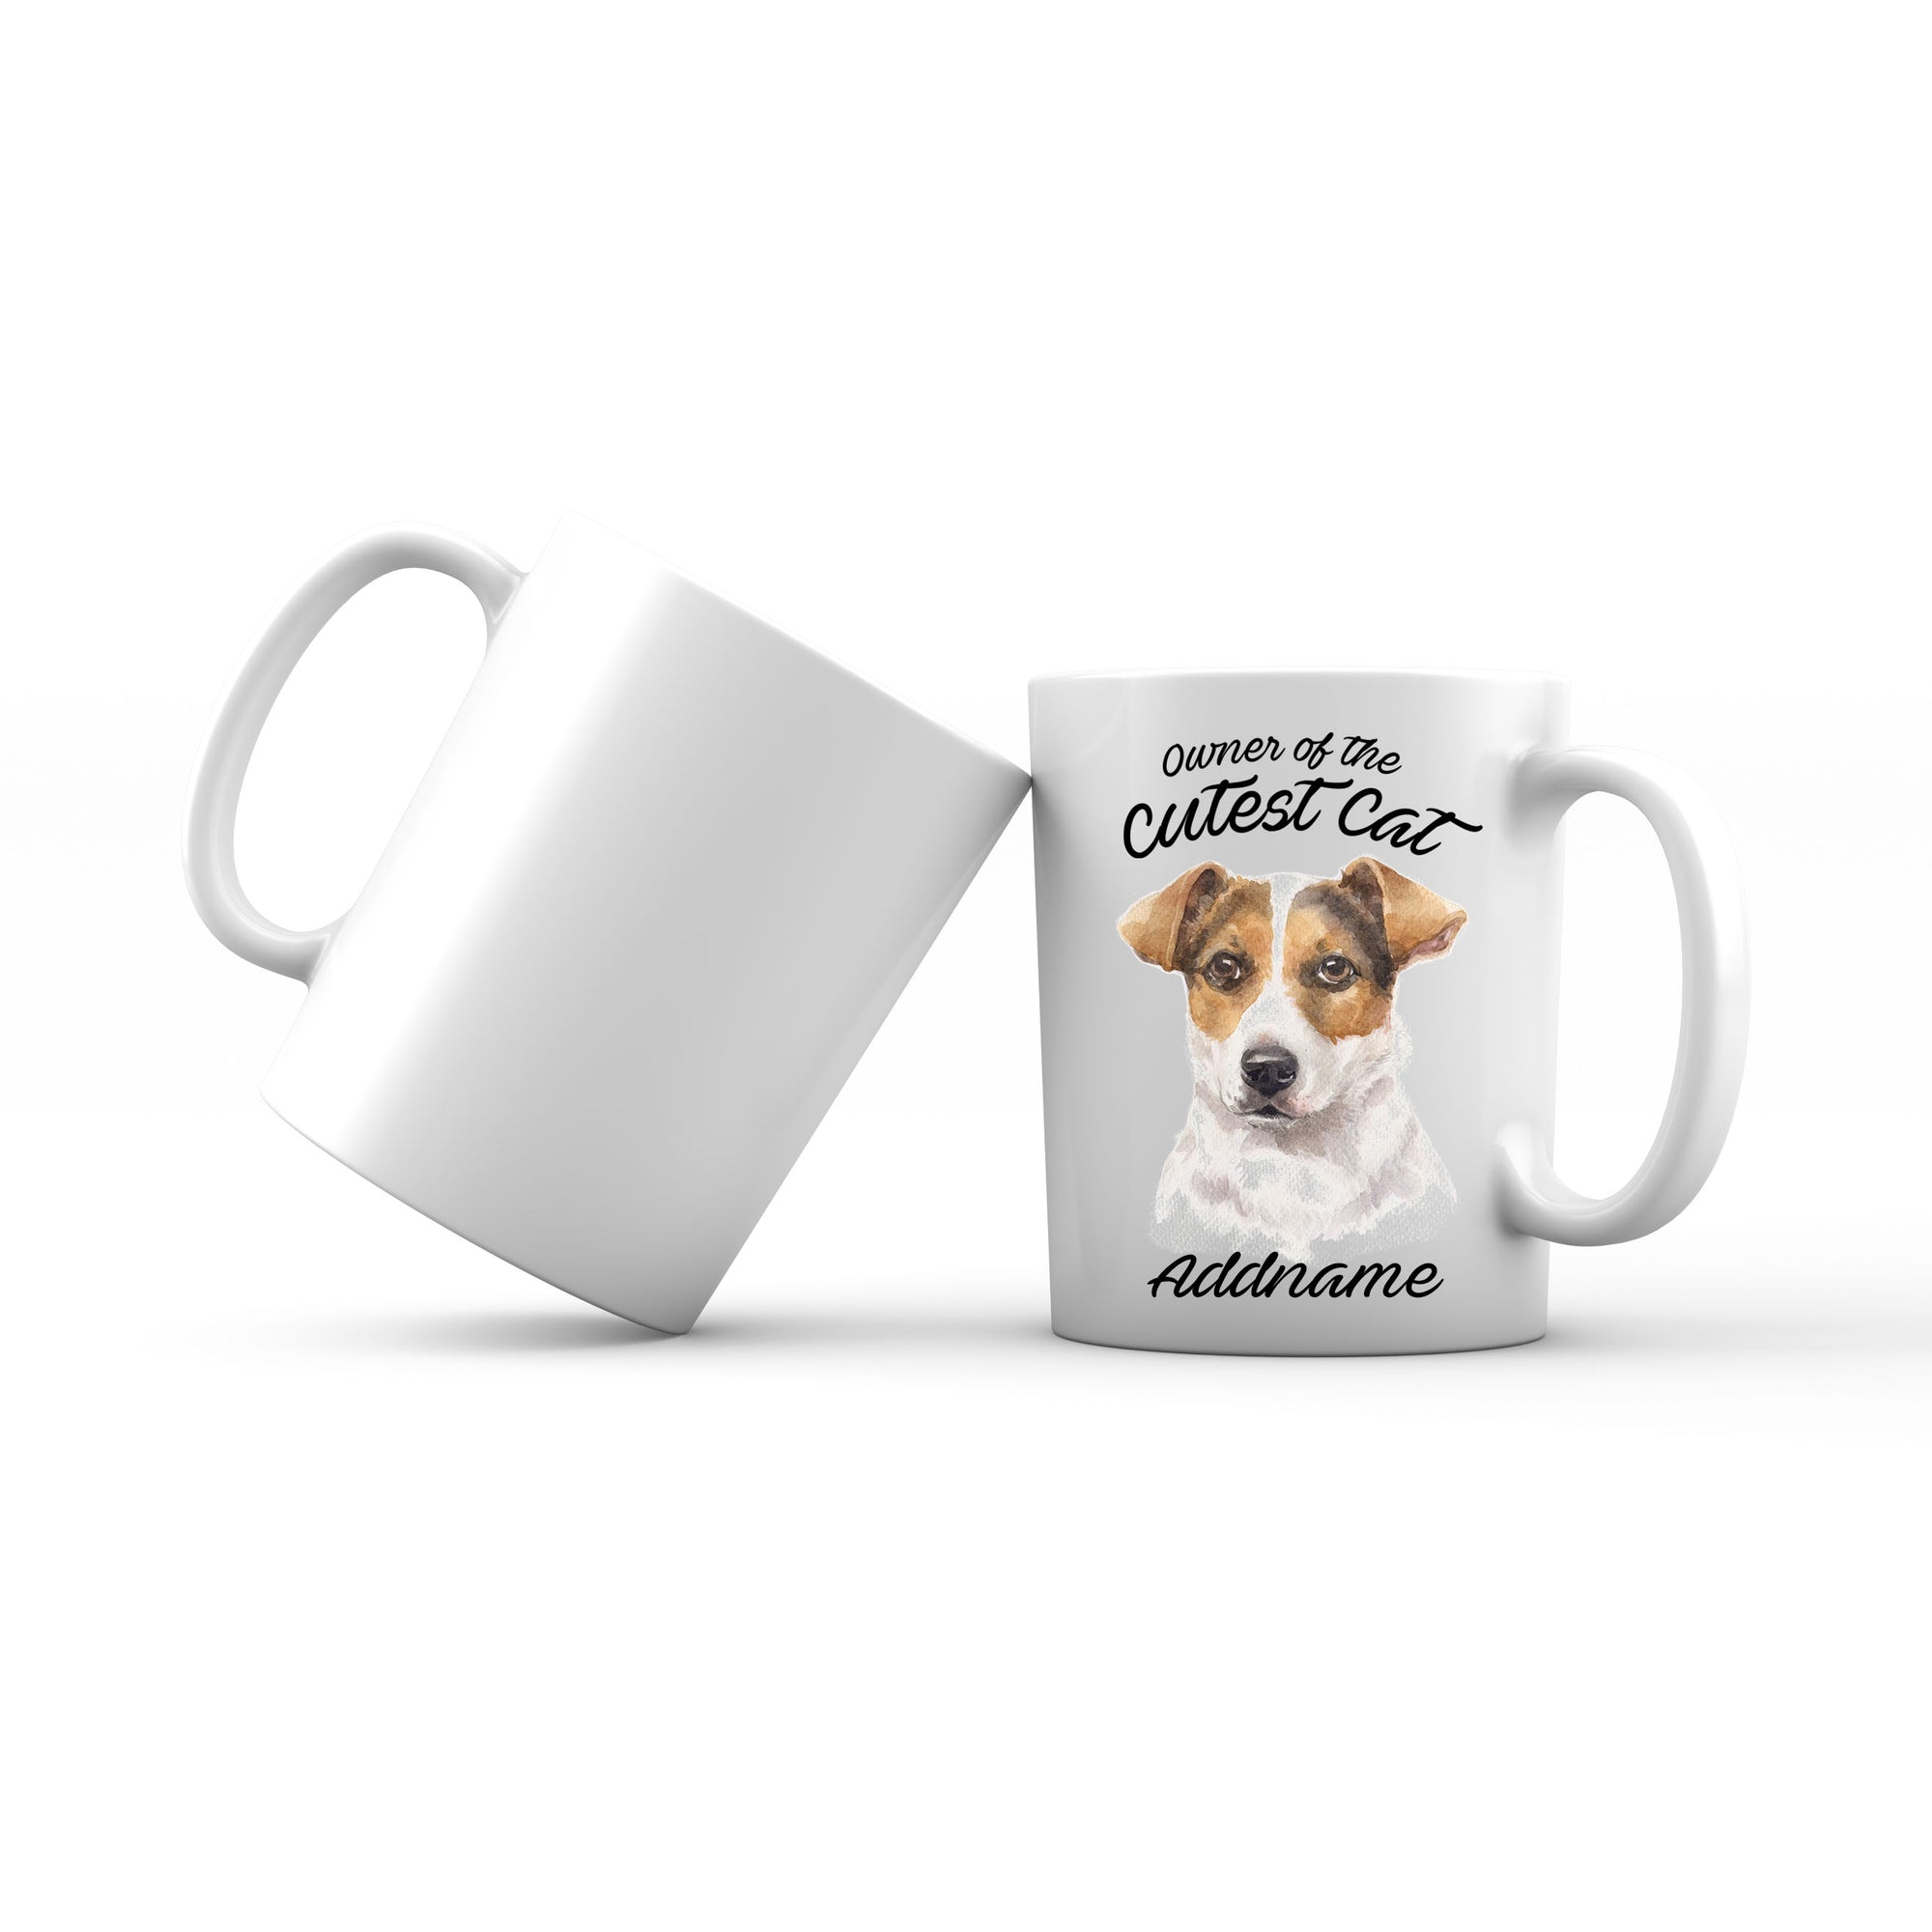 Watercolor Dog Owner Of The Cutest Dog Jack Russell Short Hair Addname Mug